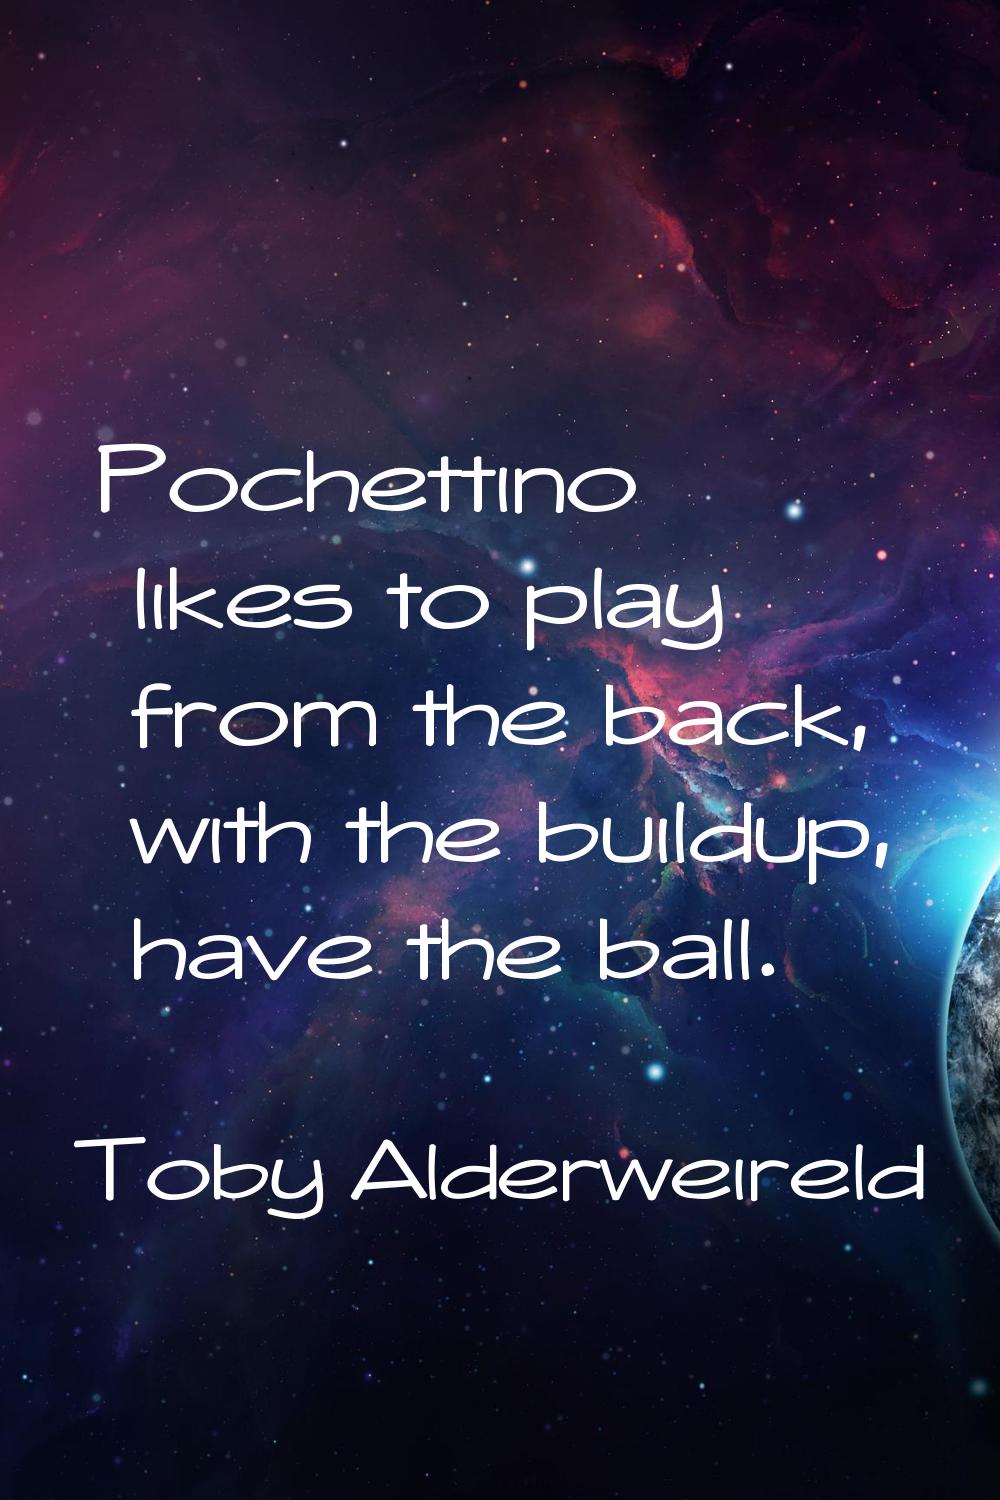 Pochettino likes to play from the back, with the buildup, have the ball.